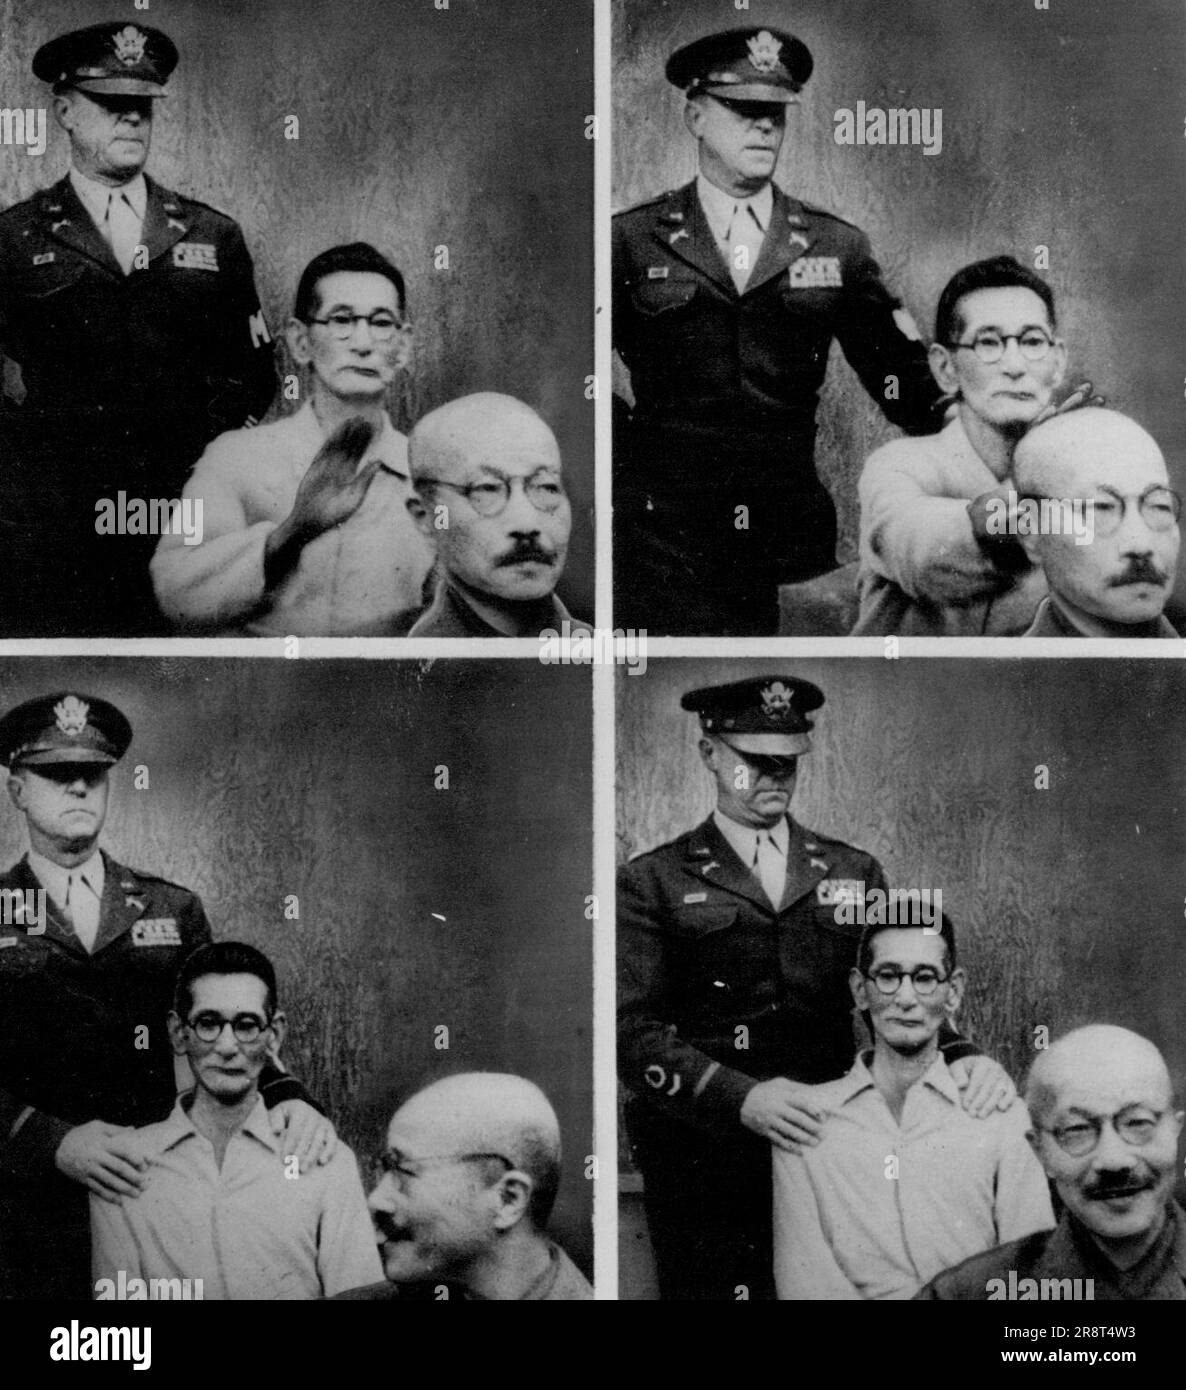 He Who Get's Slapped -- Shumei Okawa (denter, top) reaches out to slap poker-faced Hideki Tojo's bald head during the May 3 session of the Japanese war crimes trial in Tokyo. Tojo smiles (bottom left) as he turns to look at the co-defendant who slapped him and then turns back to the court proceedings. May 13, 1946. (Photo by Associated Press Photo). Stock Photo